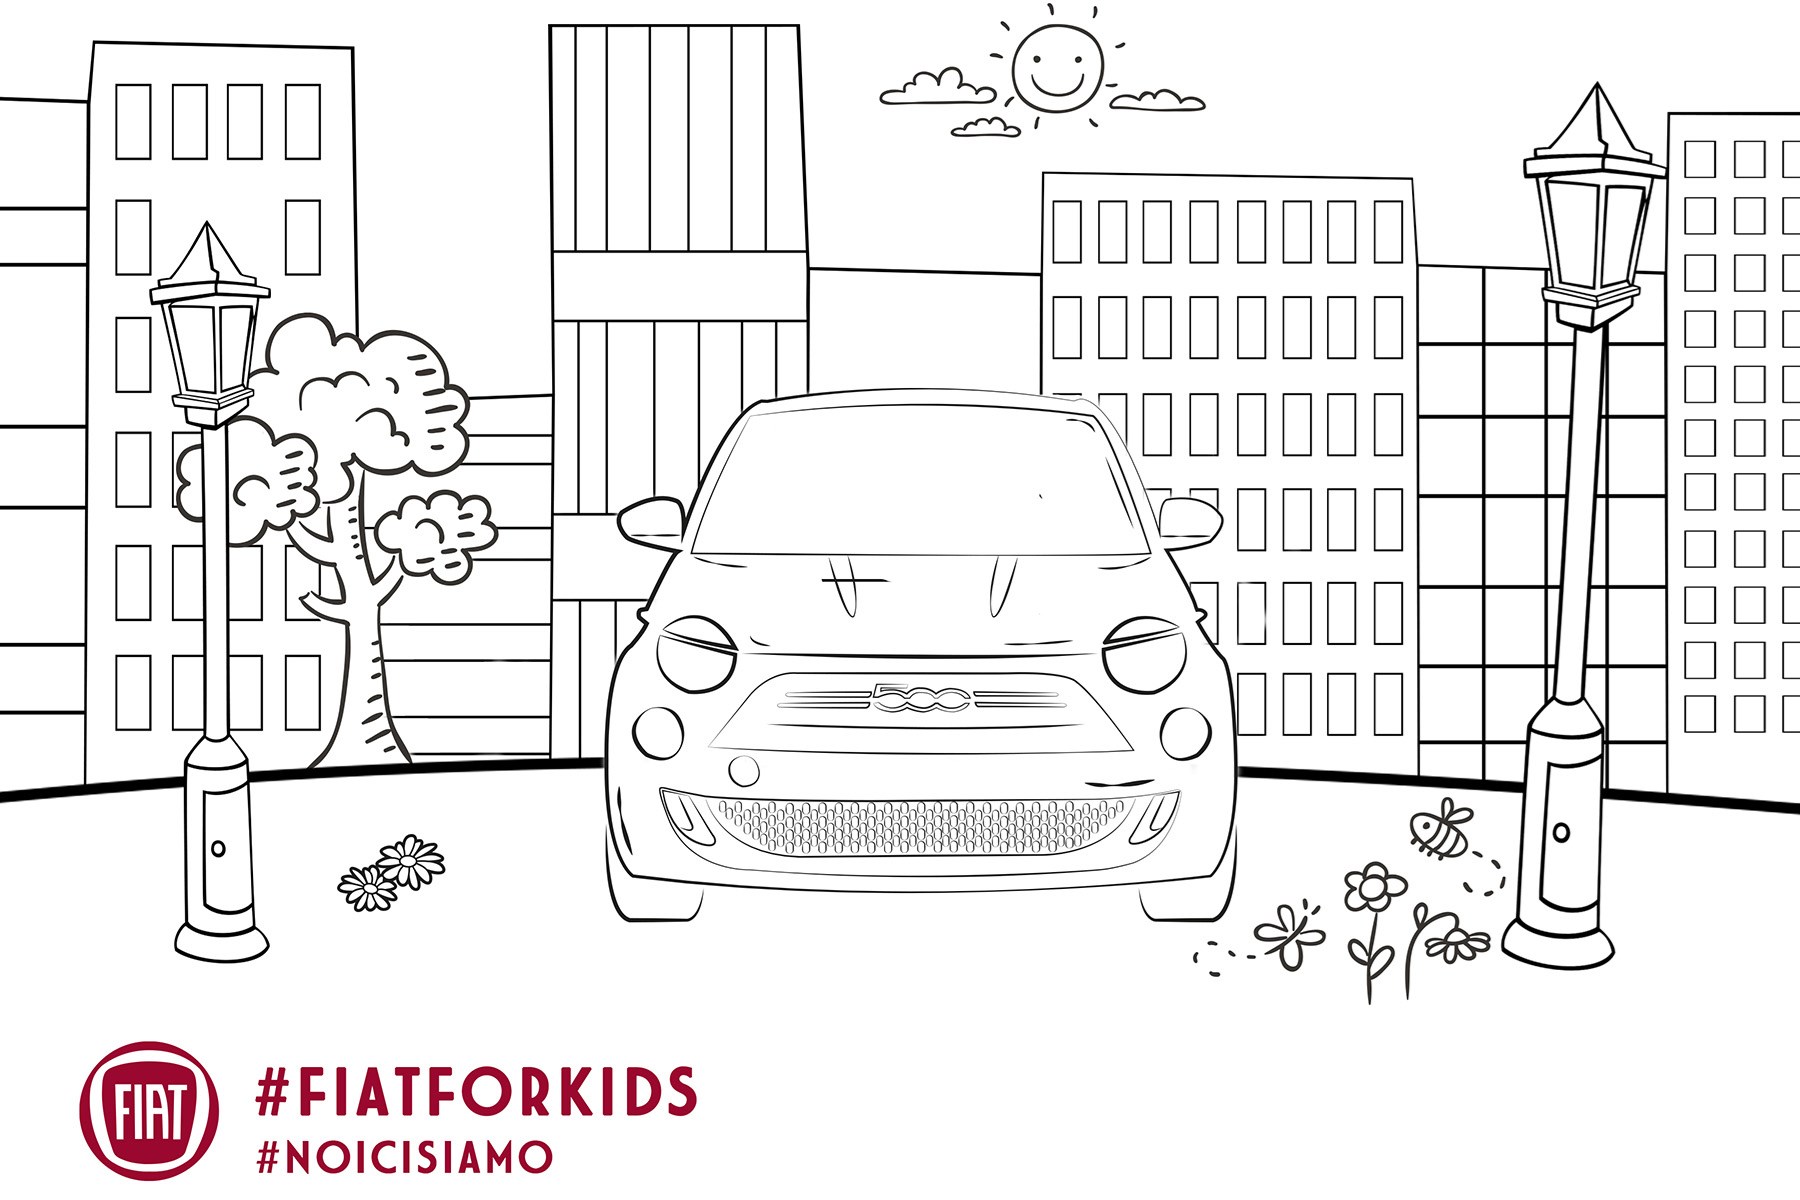 21 shades of cray on the best car colouring pages for kids   CAR ...